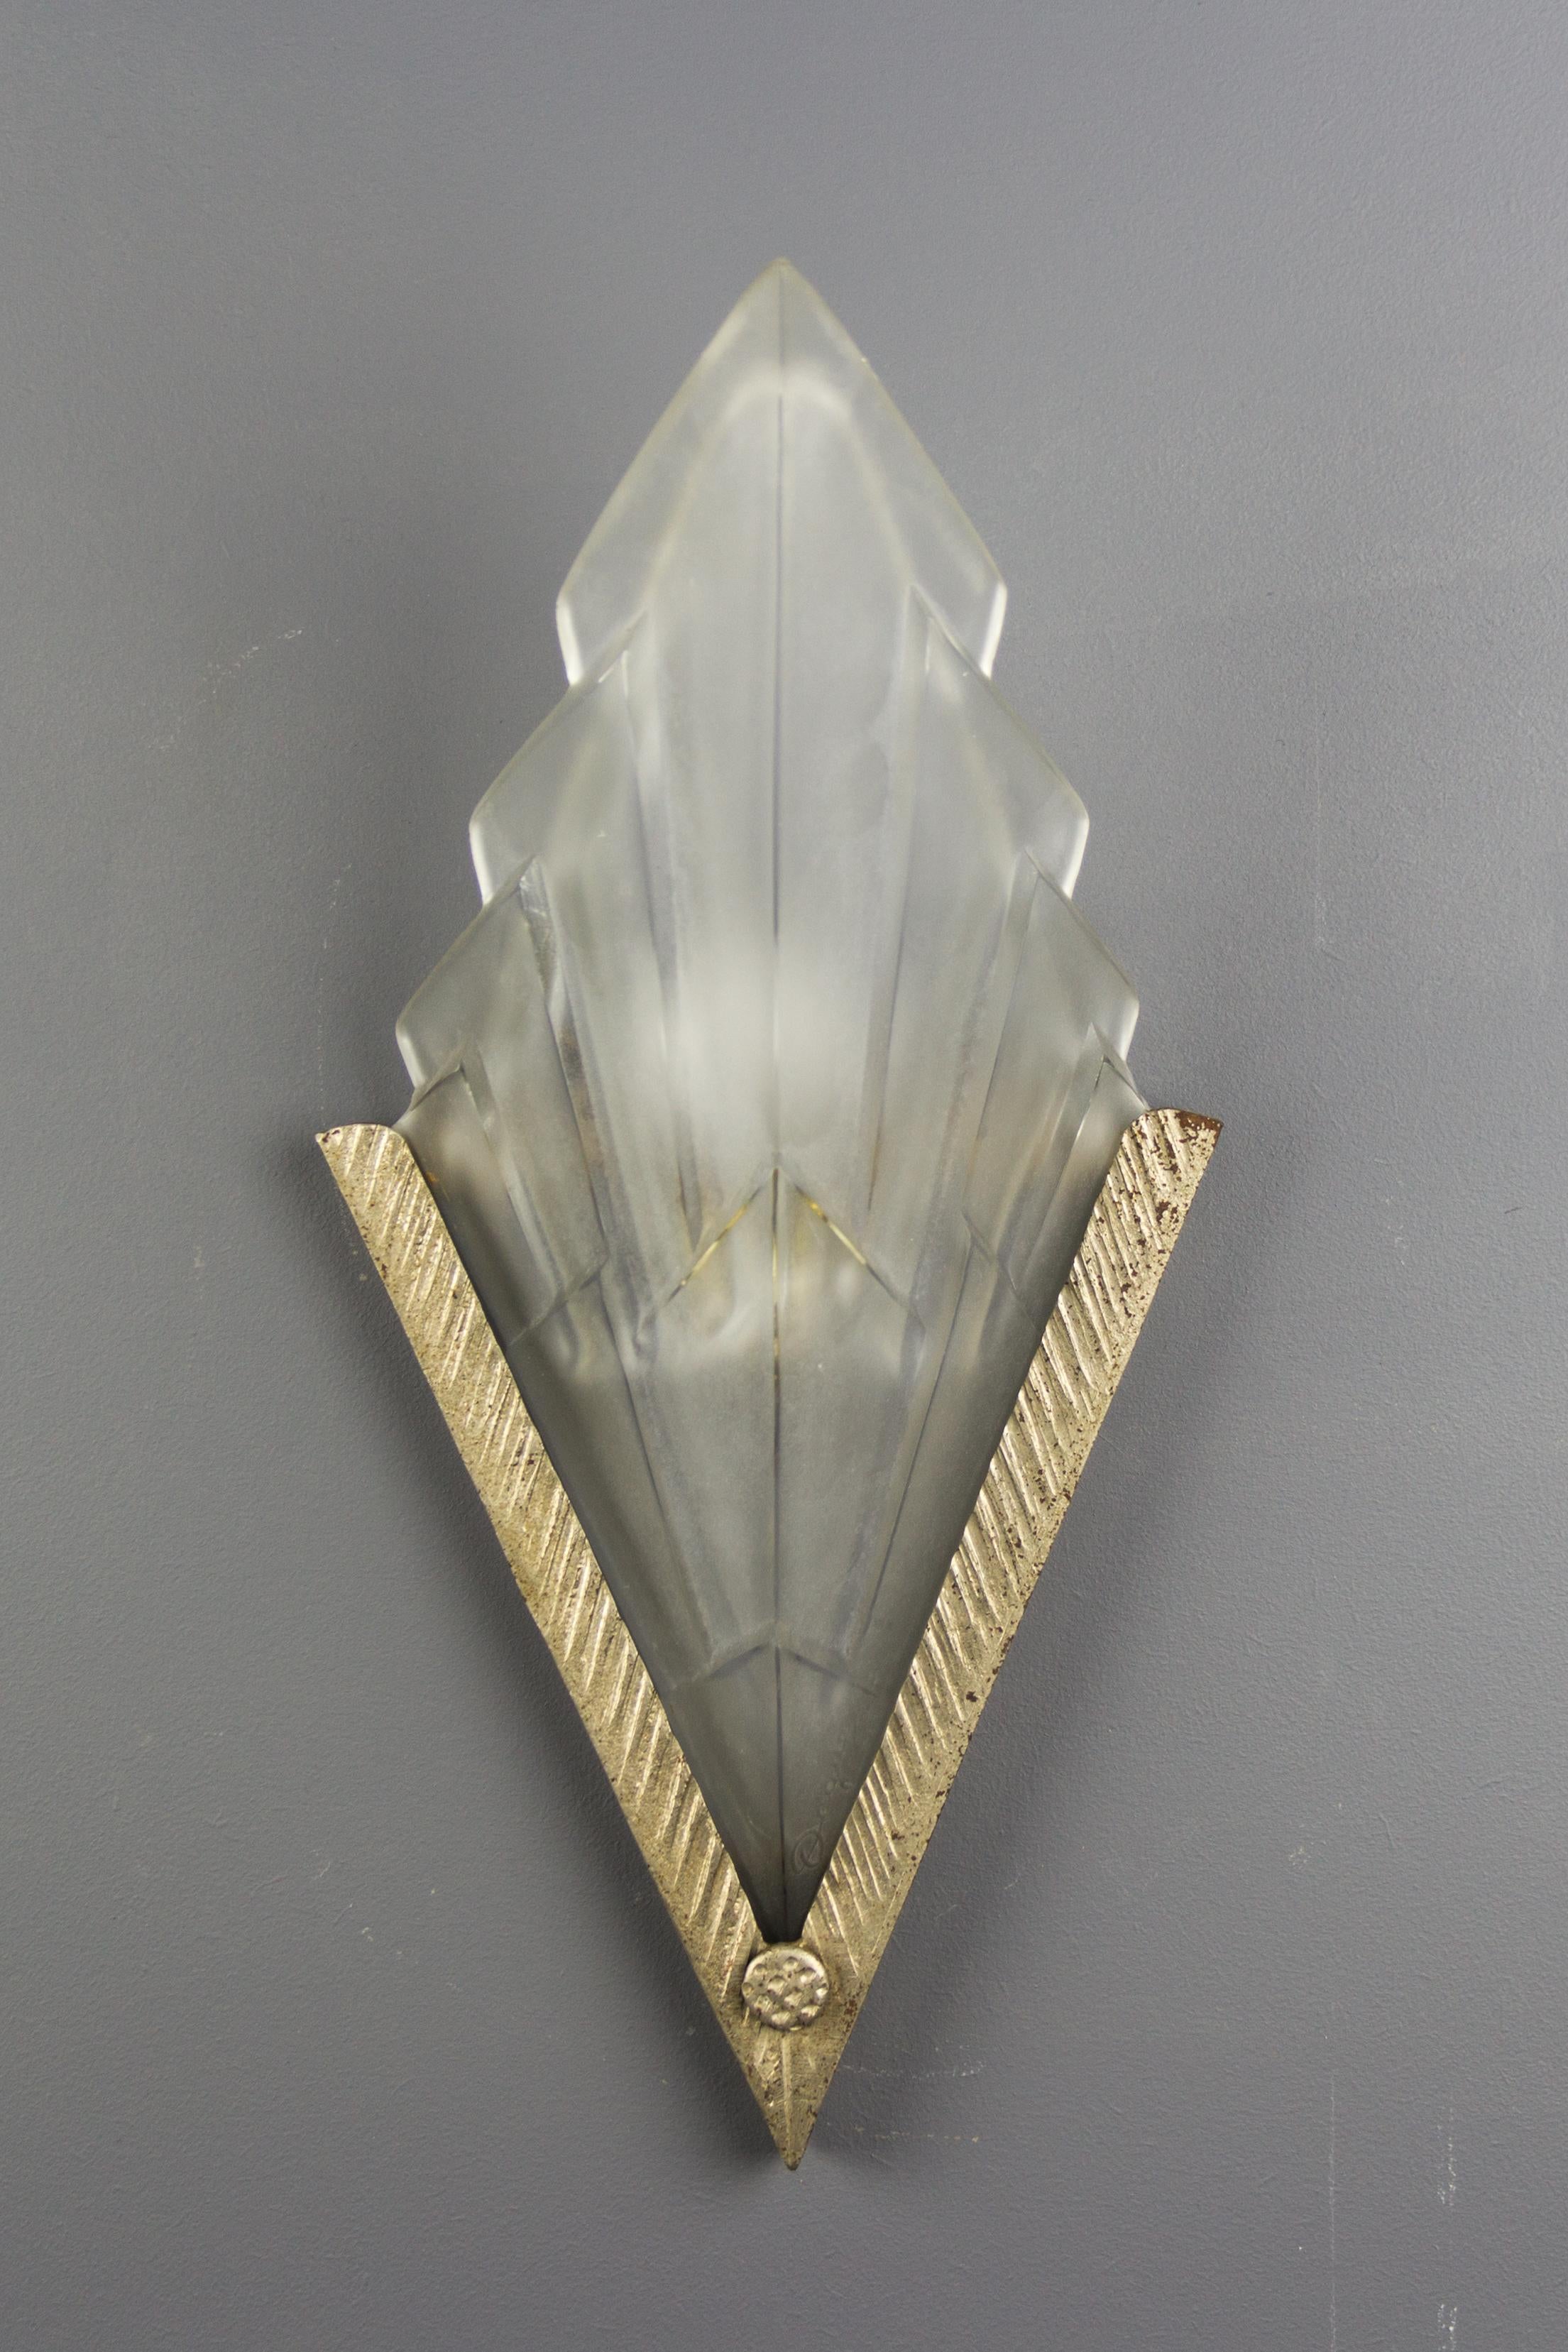 An Art Deco wall light, designed by David Gueron, signed in the glass with Degué and marked Compiegne France. Frosted glass shade mounted in a silver-colored wrought iron holder. One socket for the E14 light bulb.
Dimensions: height 39 cm / 15.35